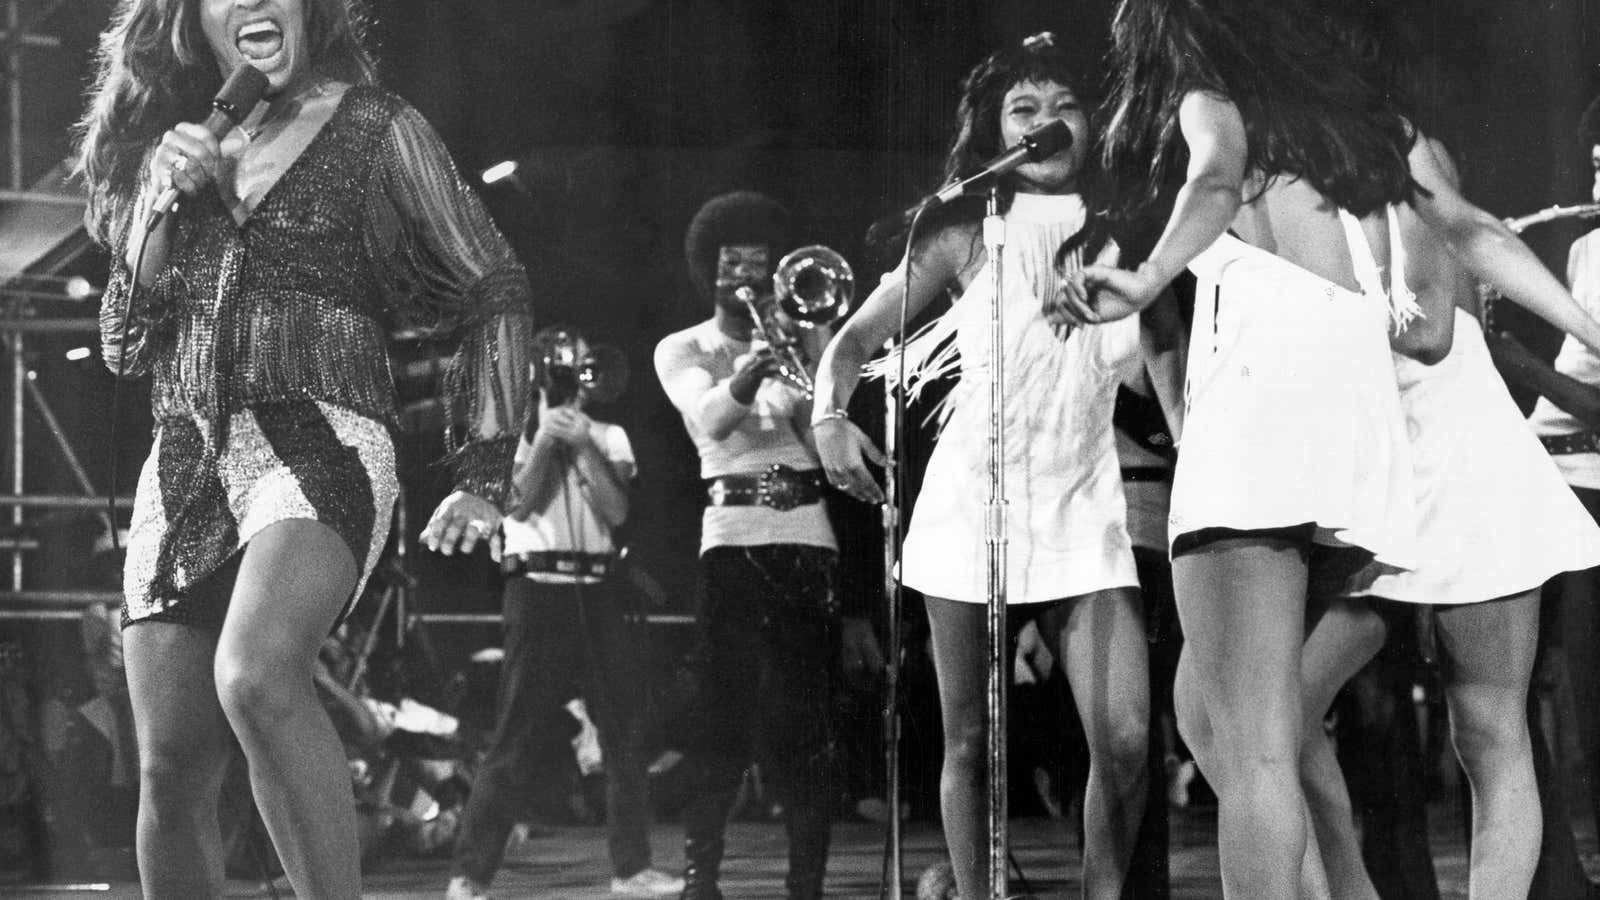 Ike &amp; Tina Turner were the “surprise packet” at the Soul To Soul concert on Mar. 6, 1971 in Accra, Ghana.